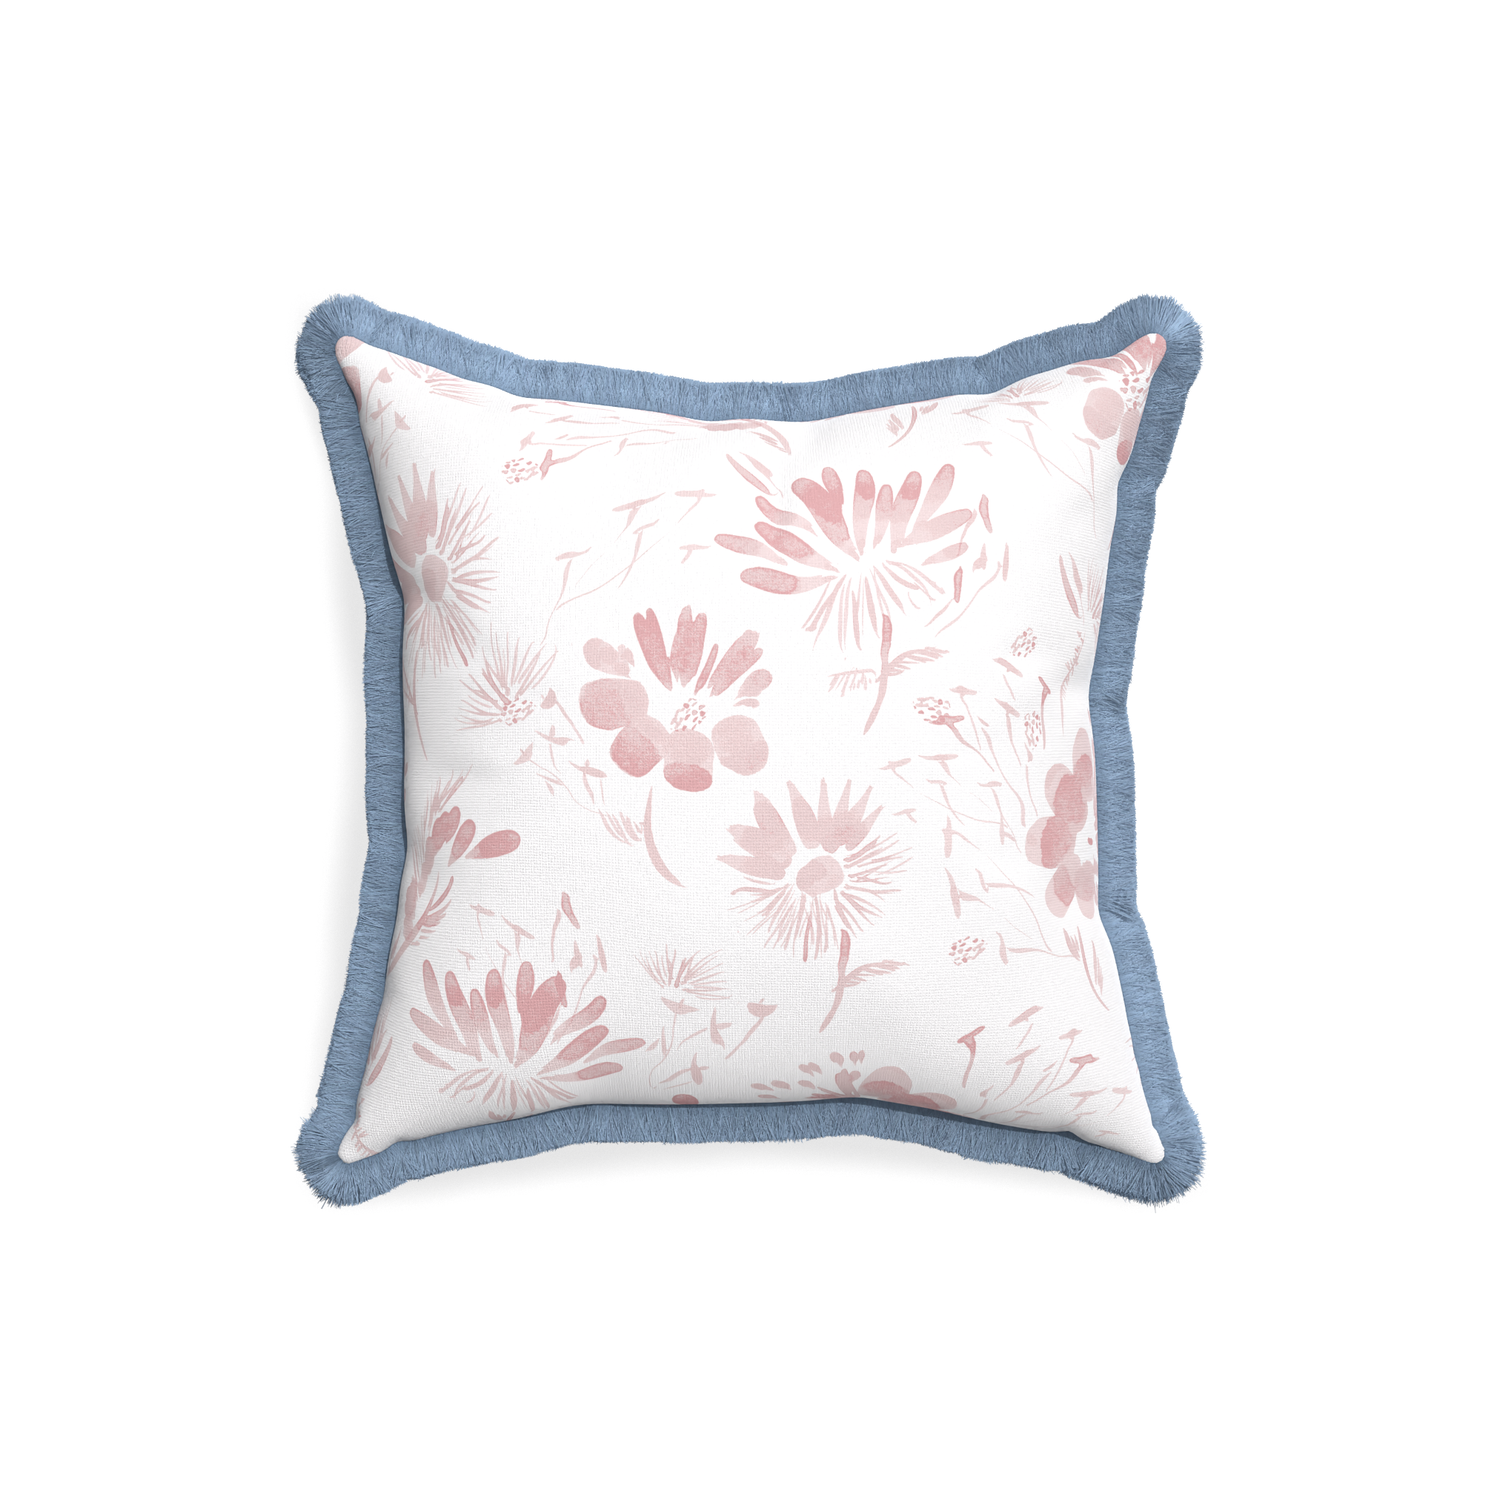 18-square blake custom pink floralpillow with sky fringe on white background